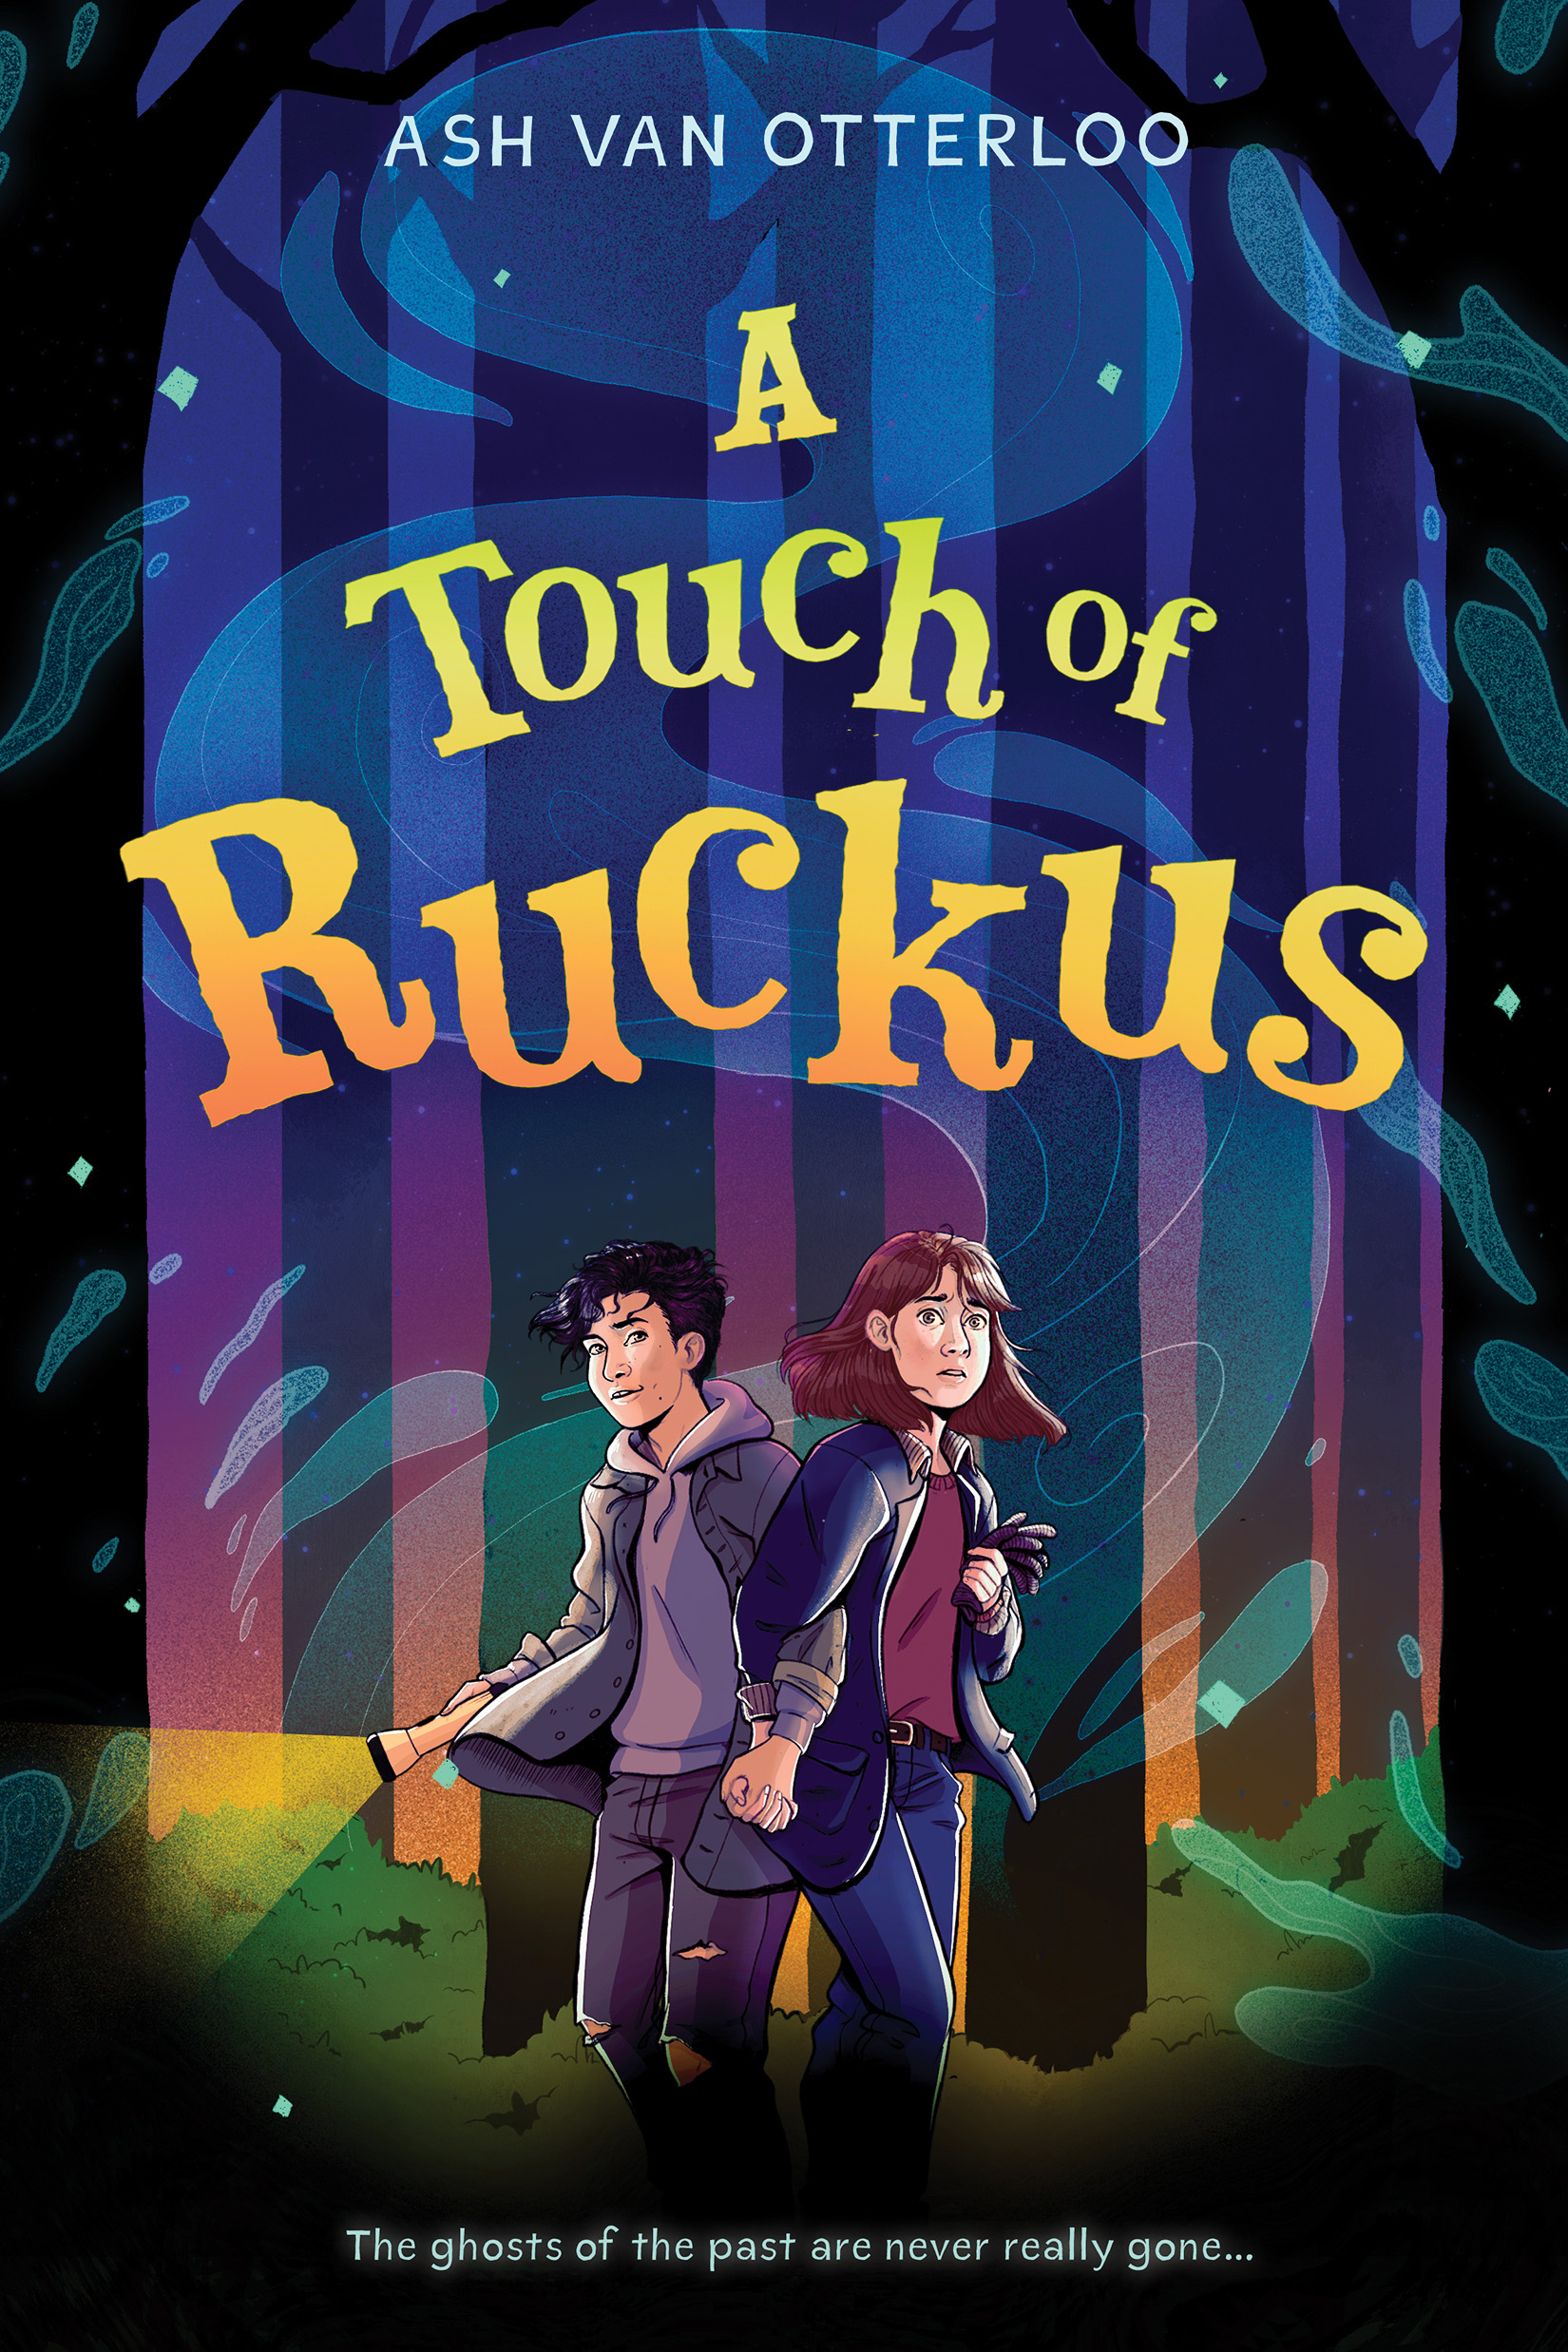 Image for "A Touch of Ruckus"